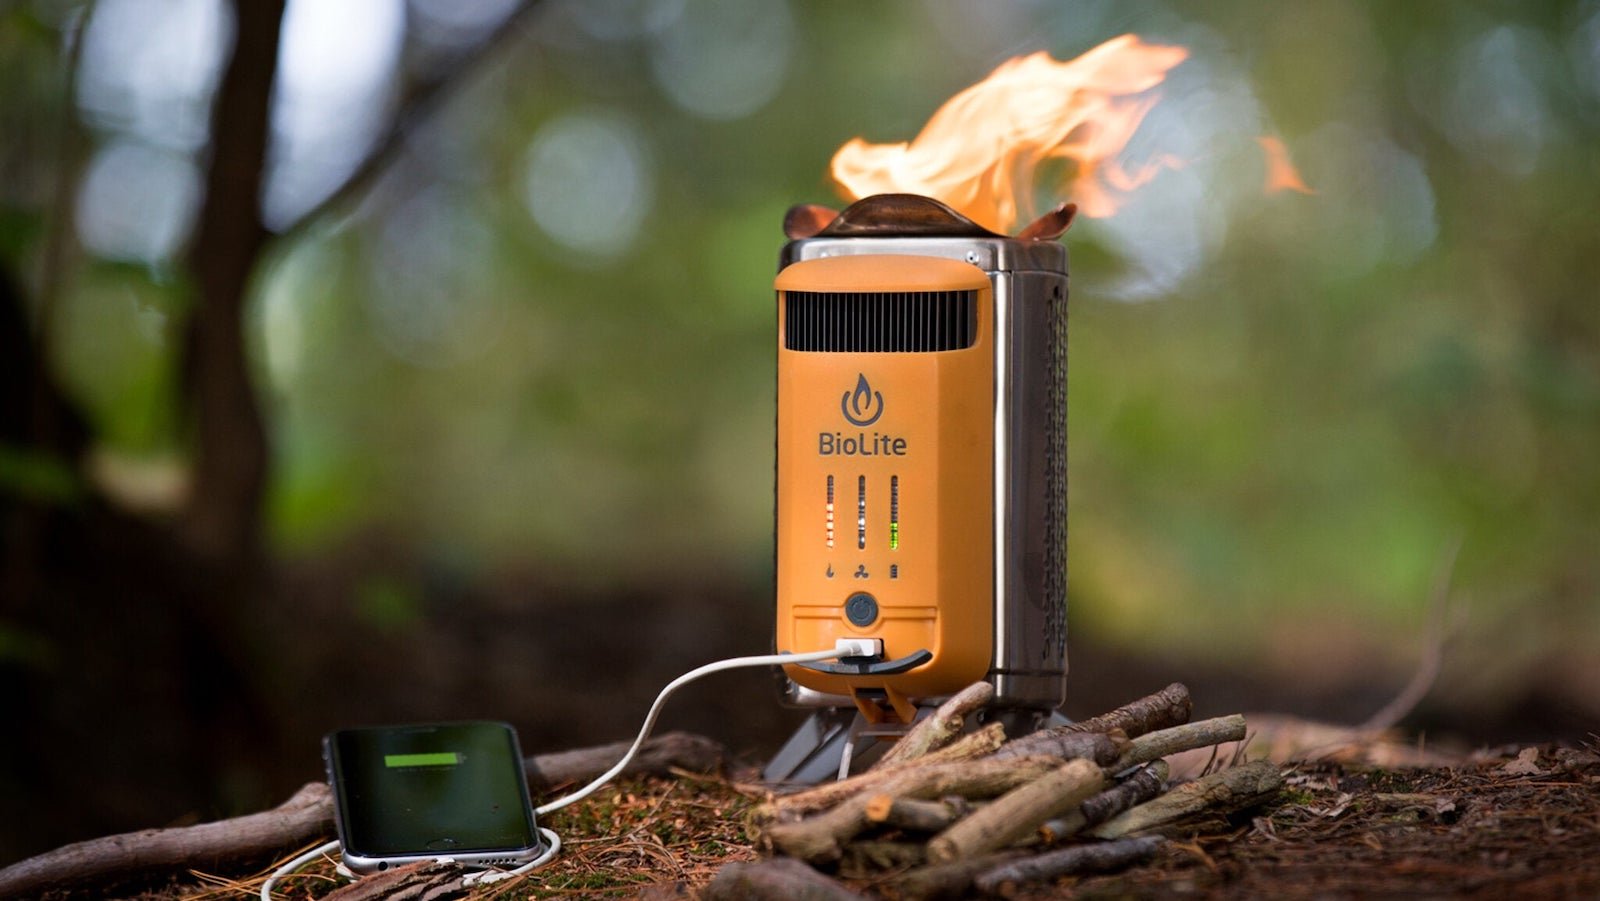 BioLite CampStove 2+ electricity-generating wood stove turns your fire into power